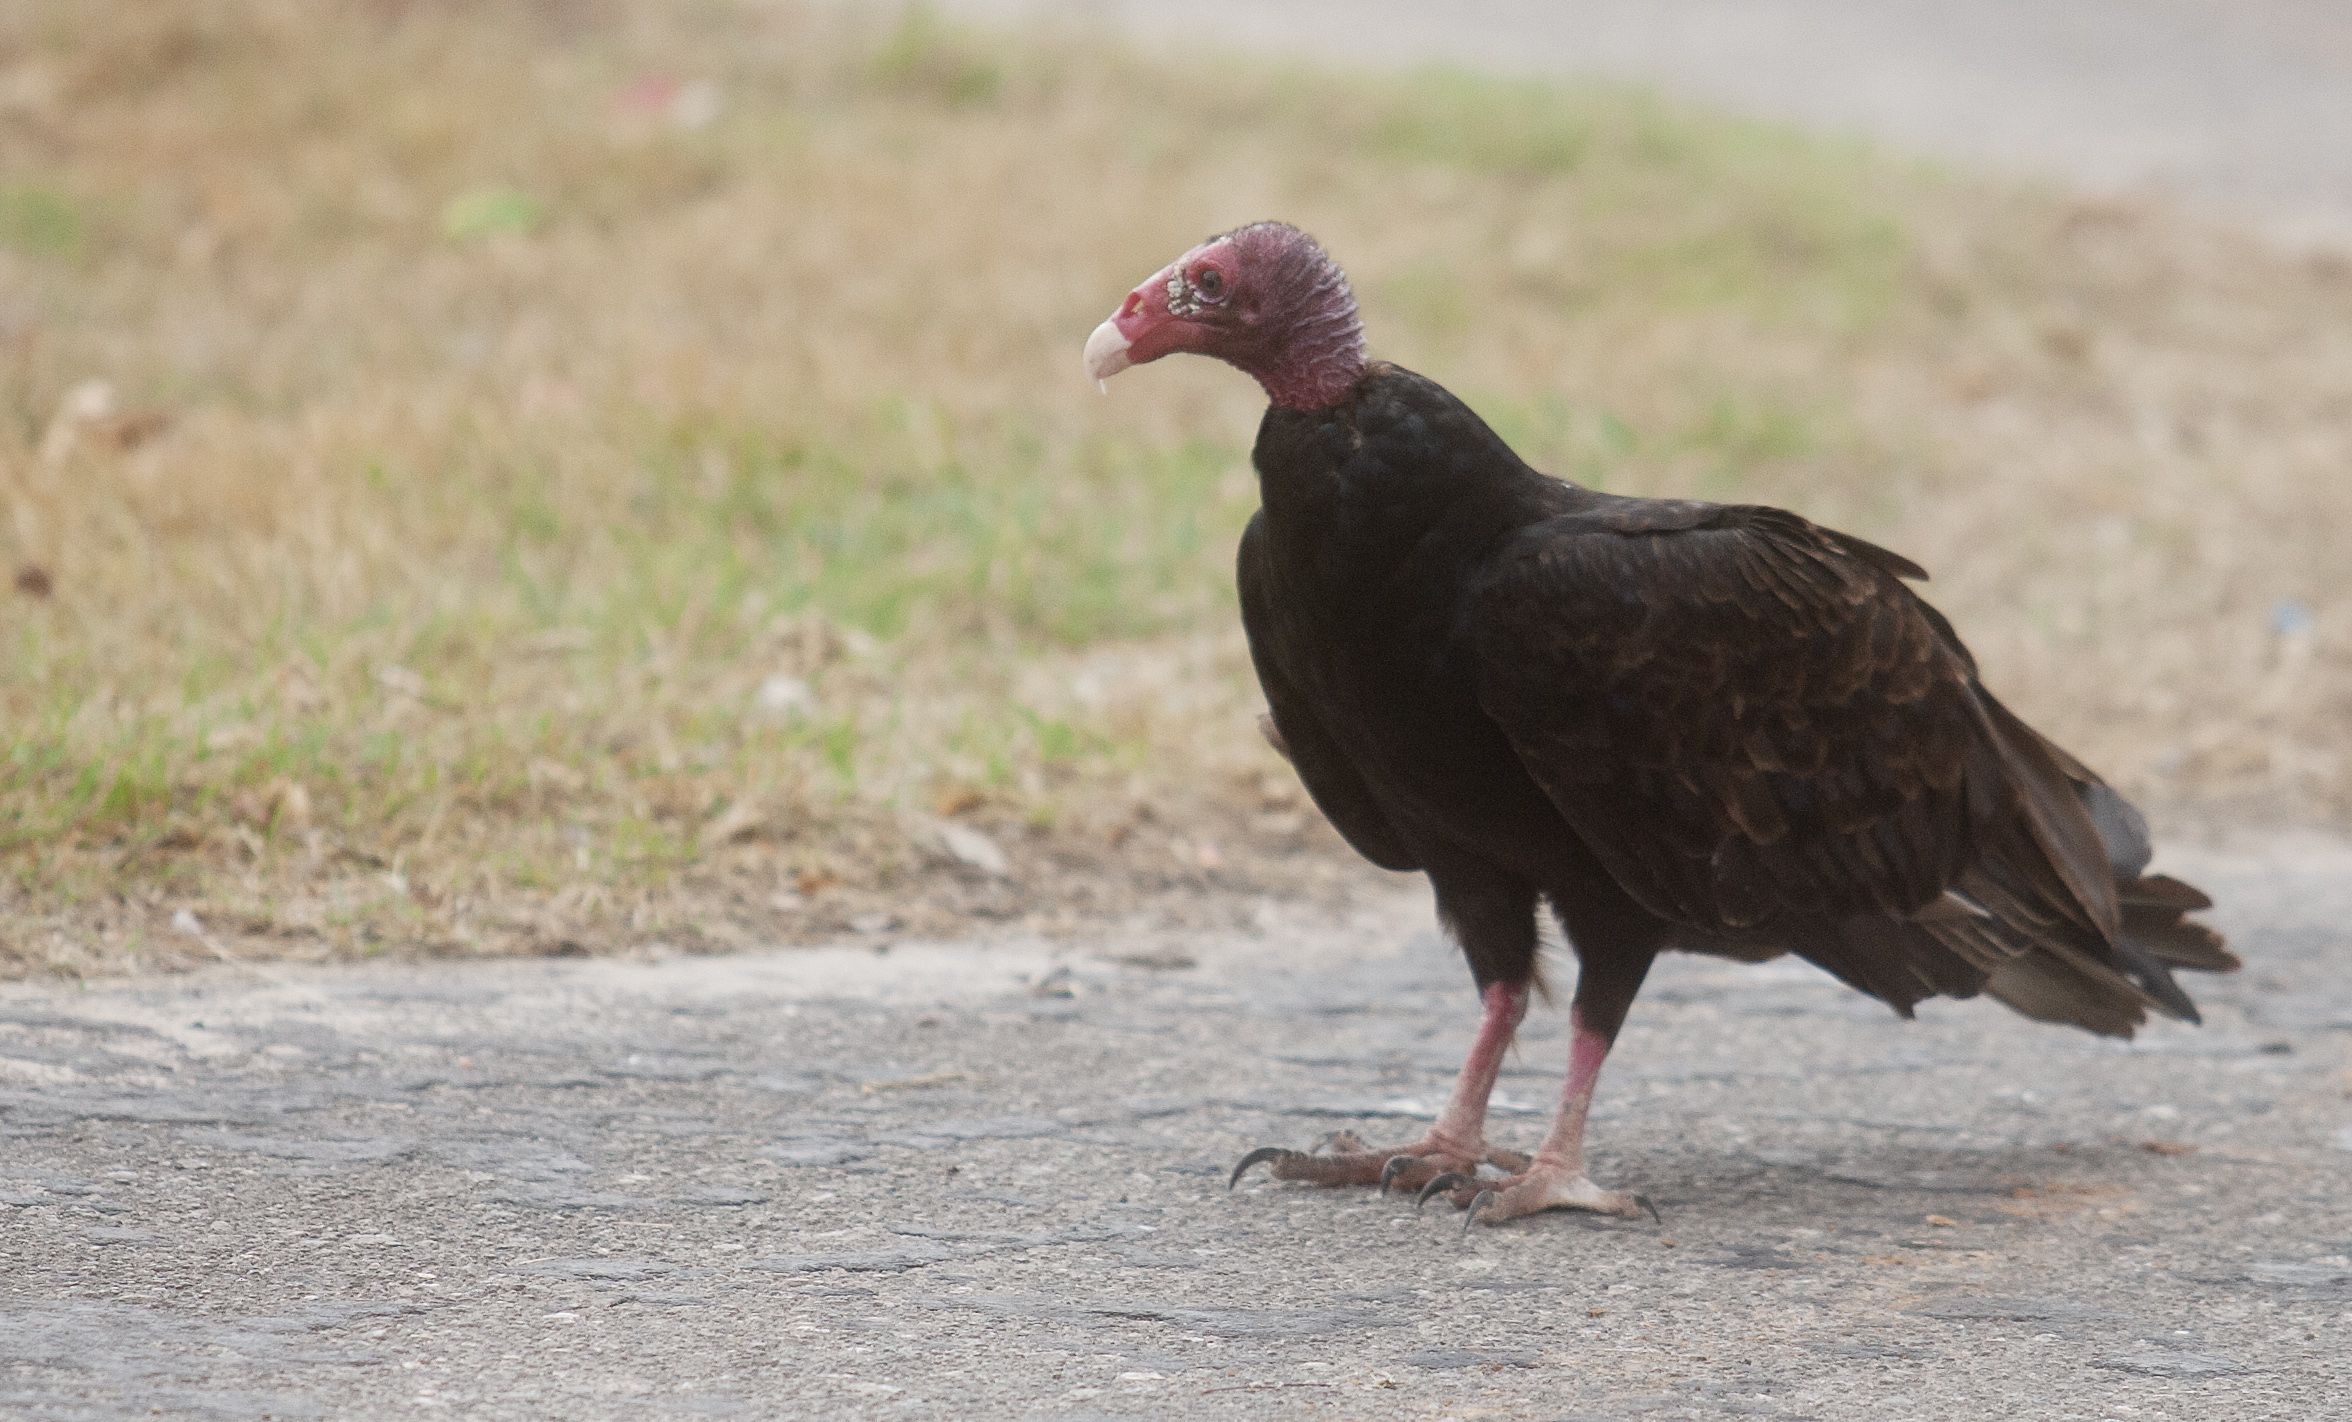 CARRION REGARDLESS: Vultures feeding on roadkill were easily spotted in Cuba – not so the elusive hummingbird